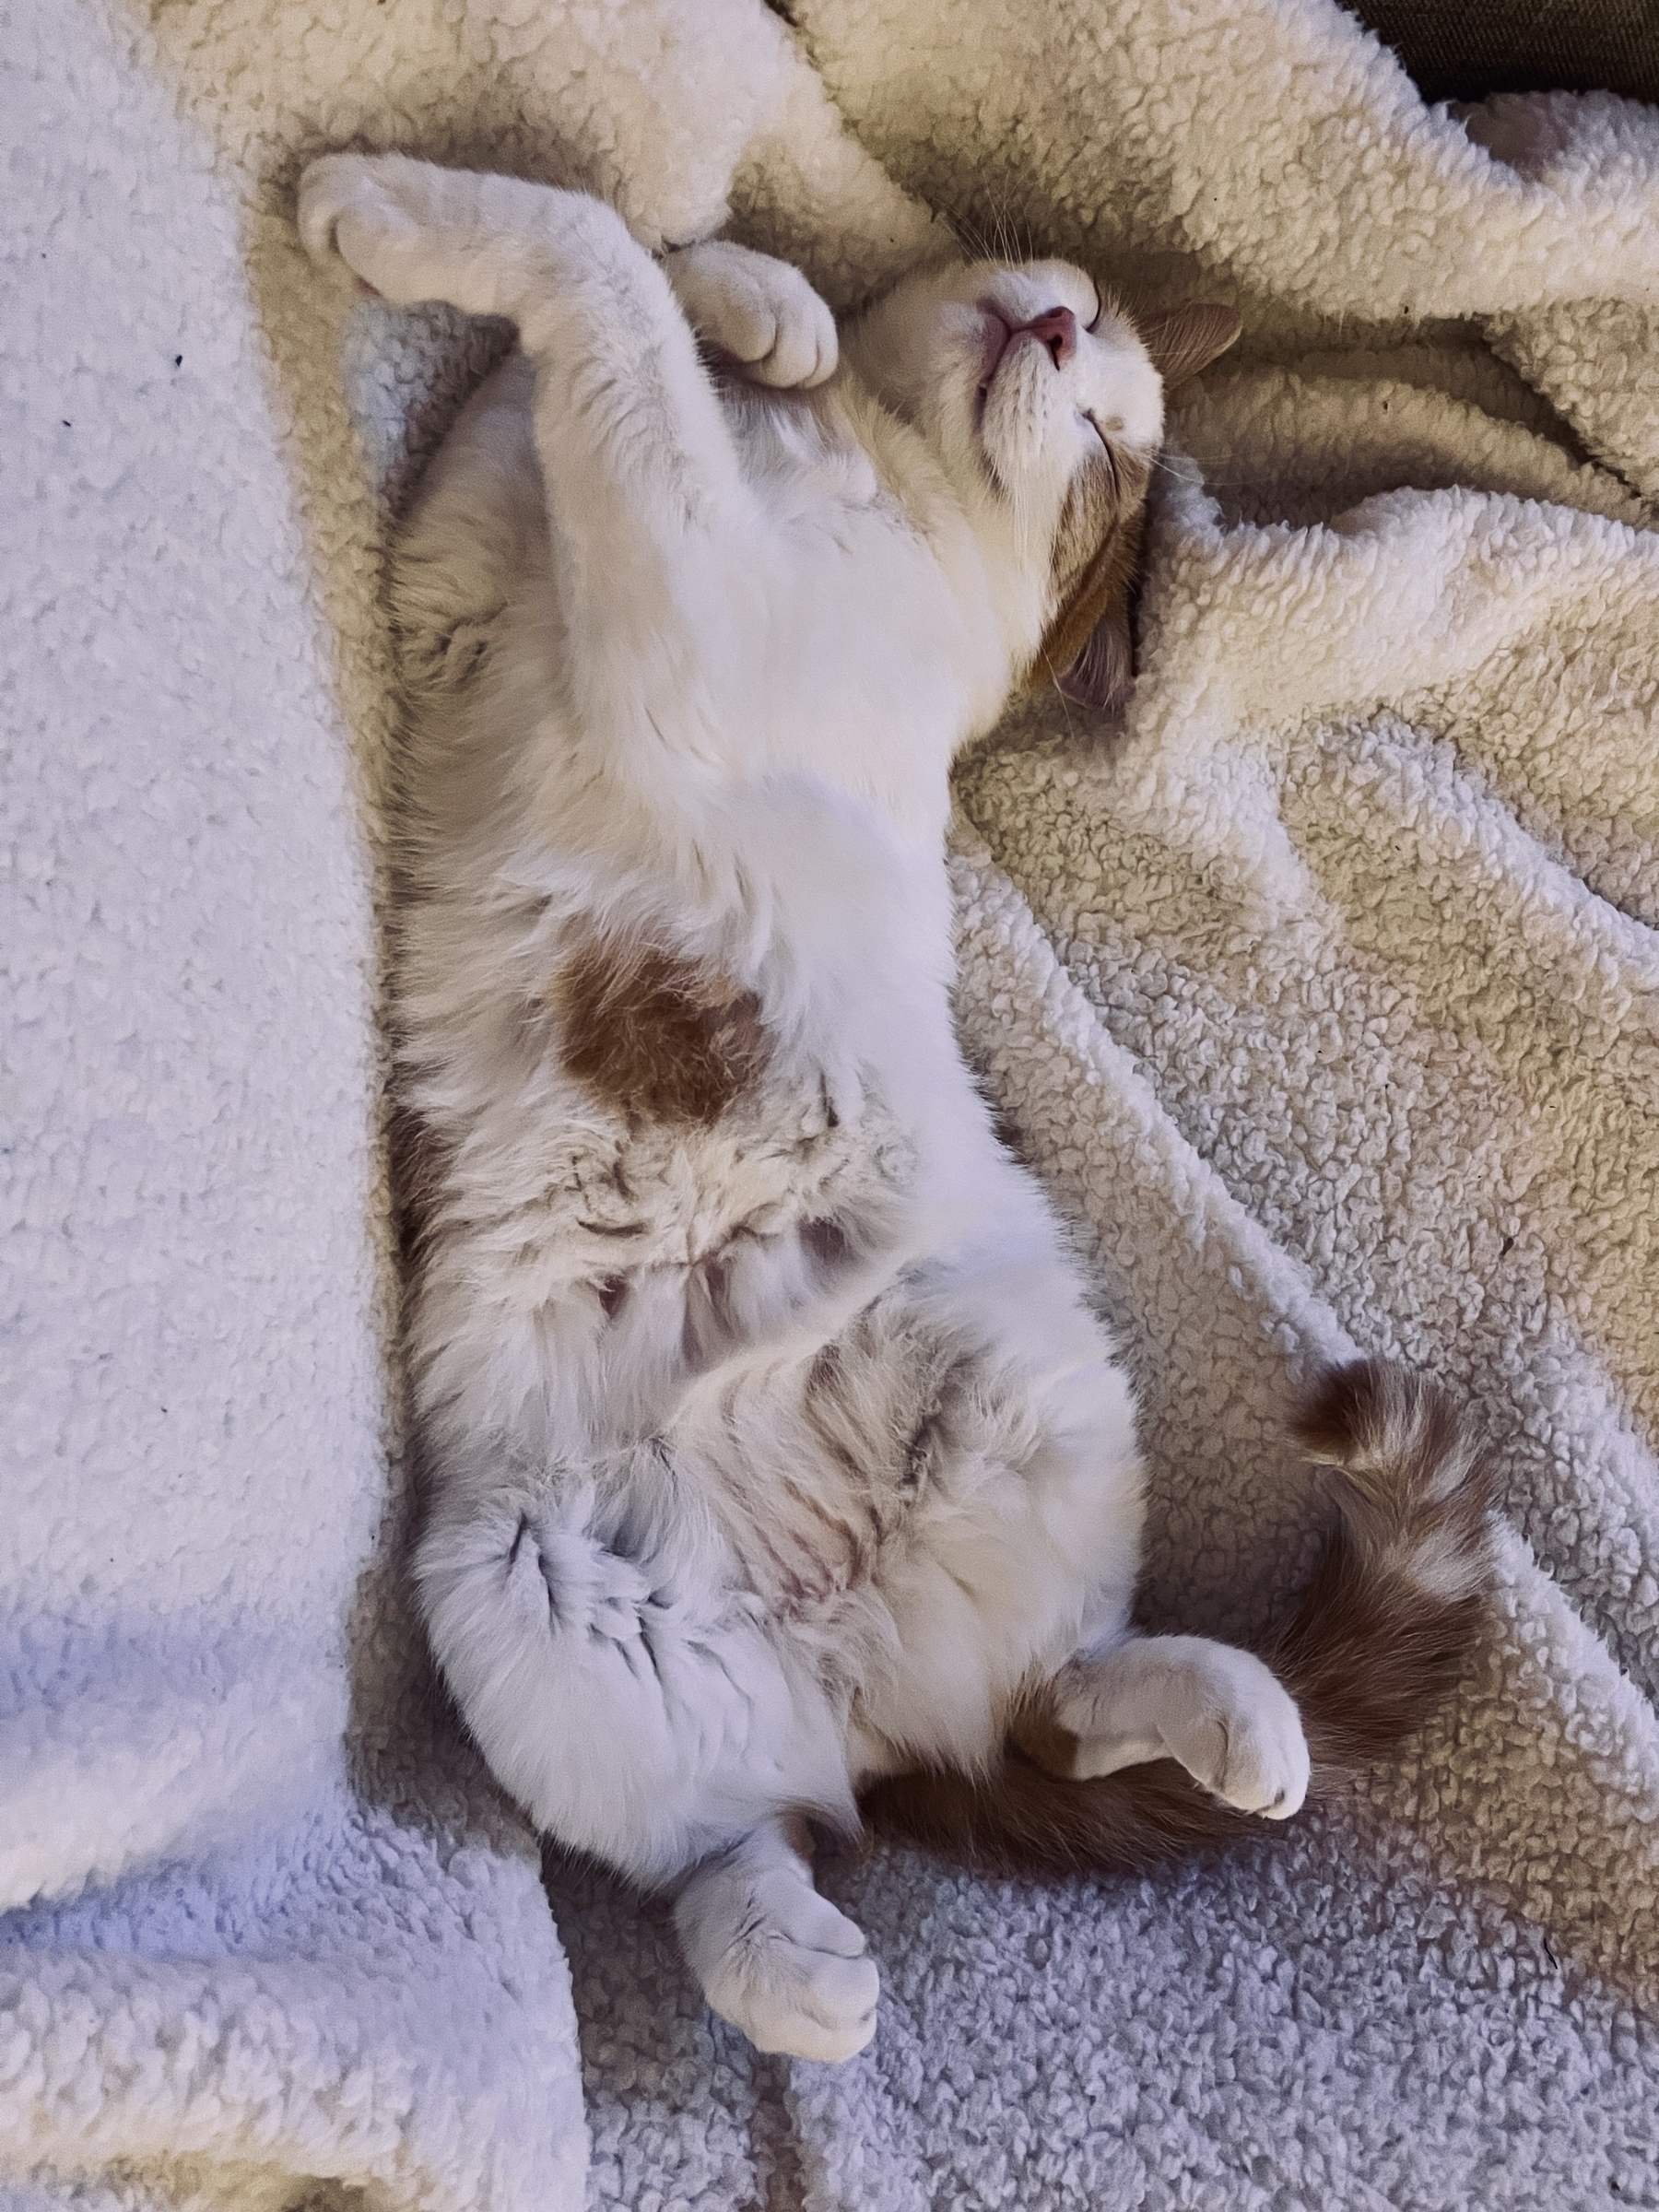 Orange and white cat sleeping on his back completely relaxed on a soft blanket